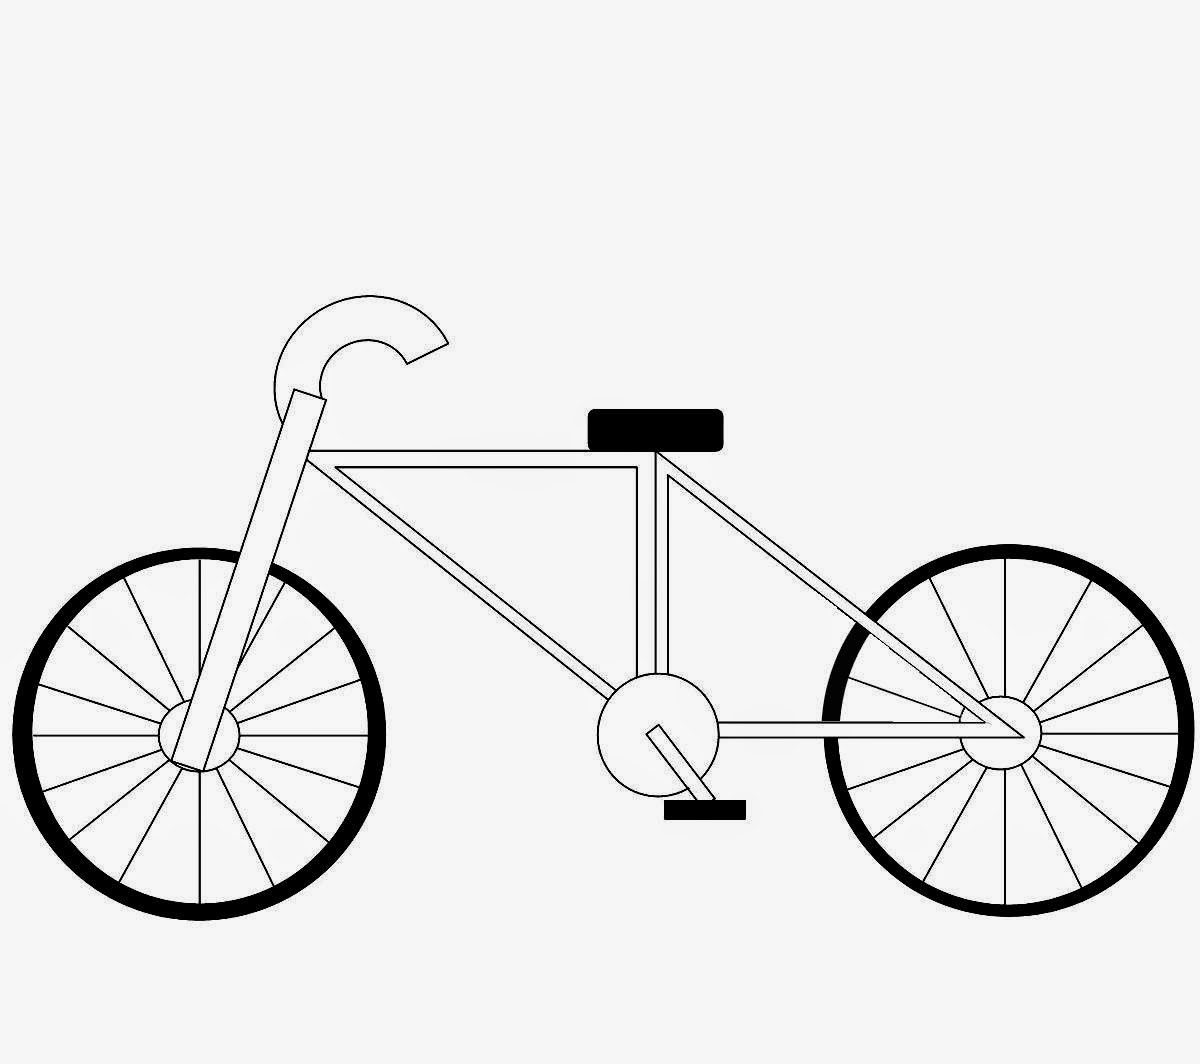 Bicycle For Kid Coloring Page Free wallpaper